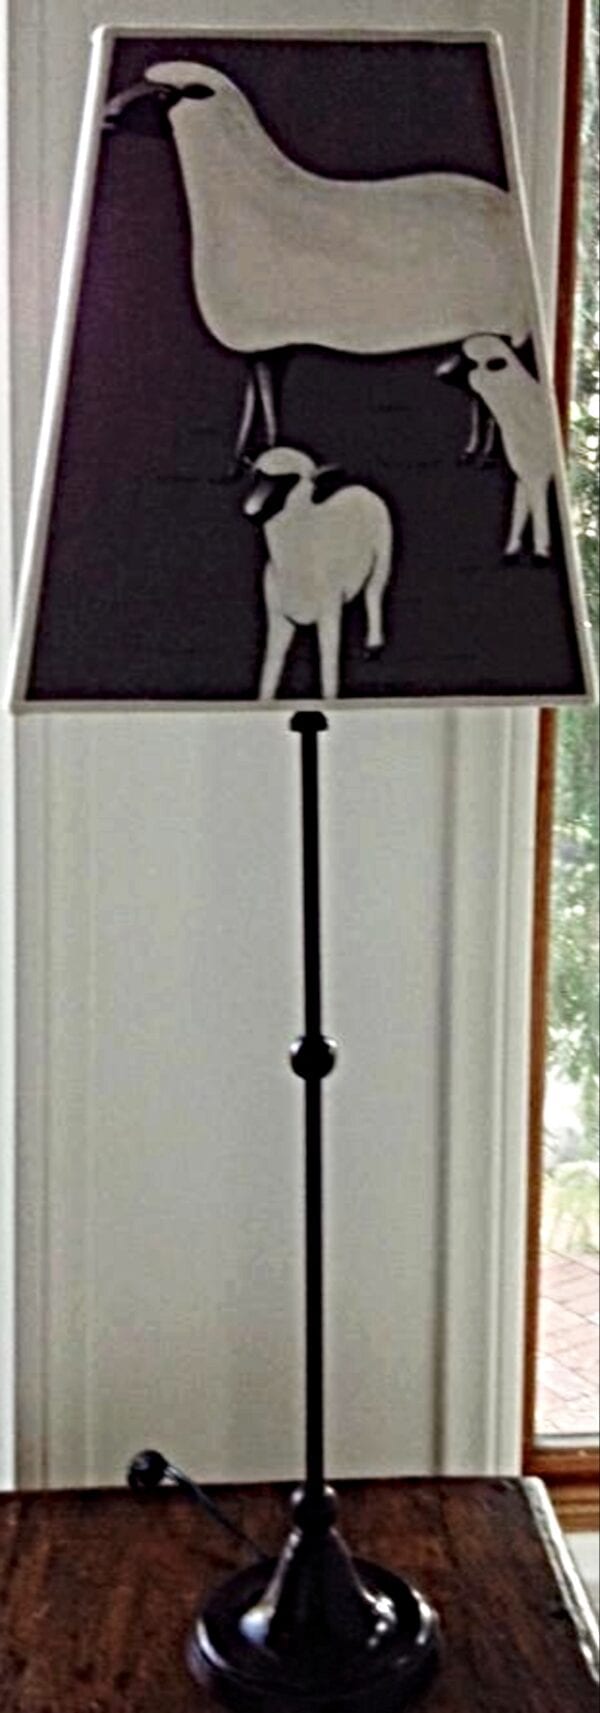 A sheep designed shade for the lamp